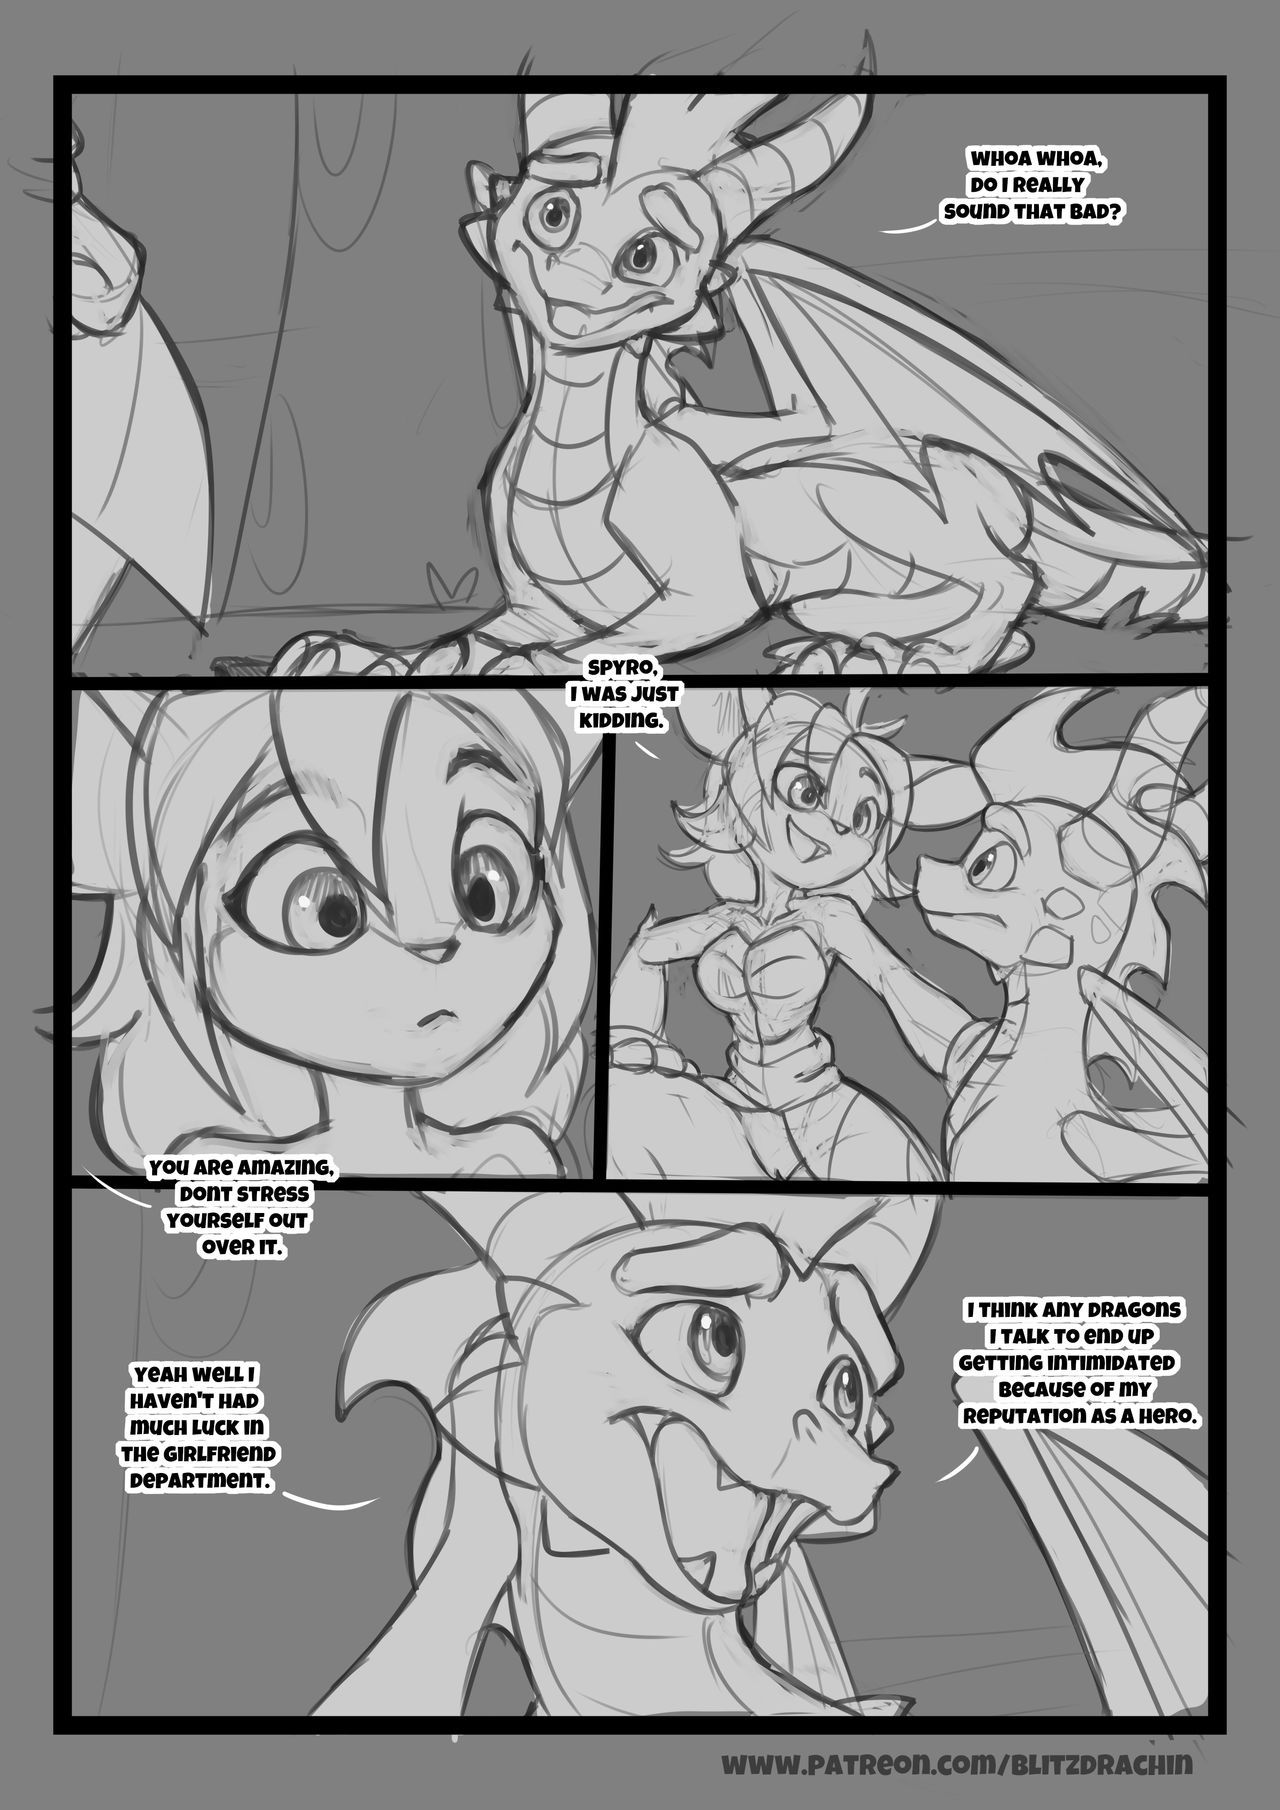 [Blitzdrachin] A Time with the Hero (Spyro the Dragon) [Ongoing] 5